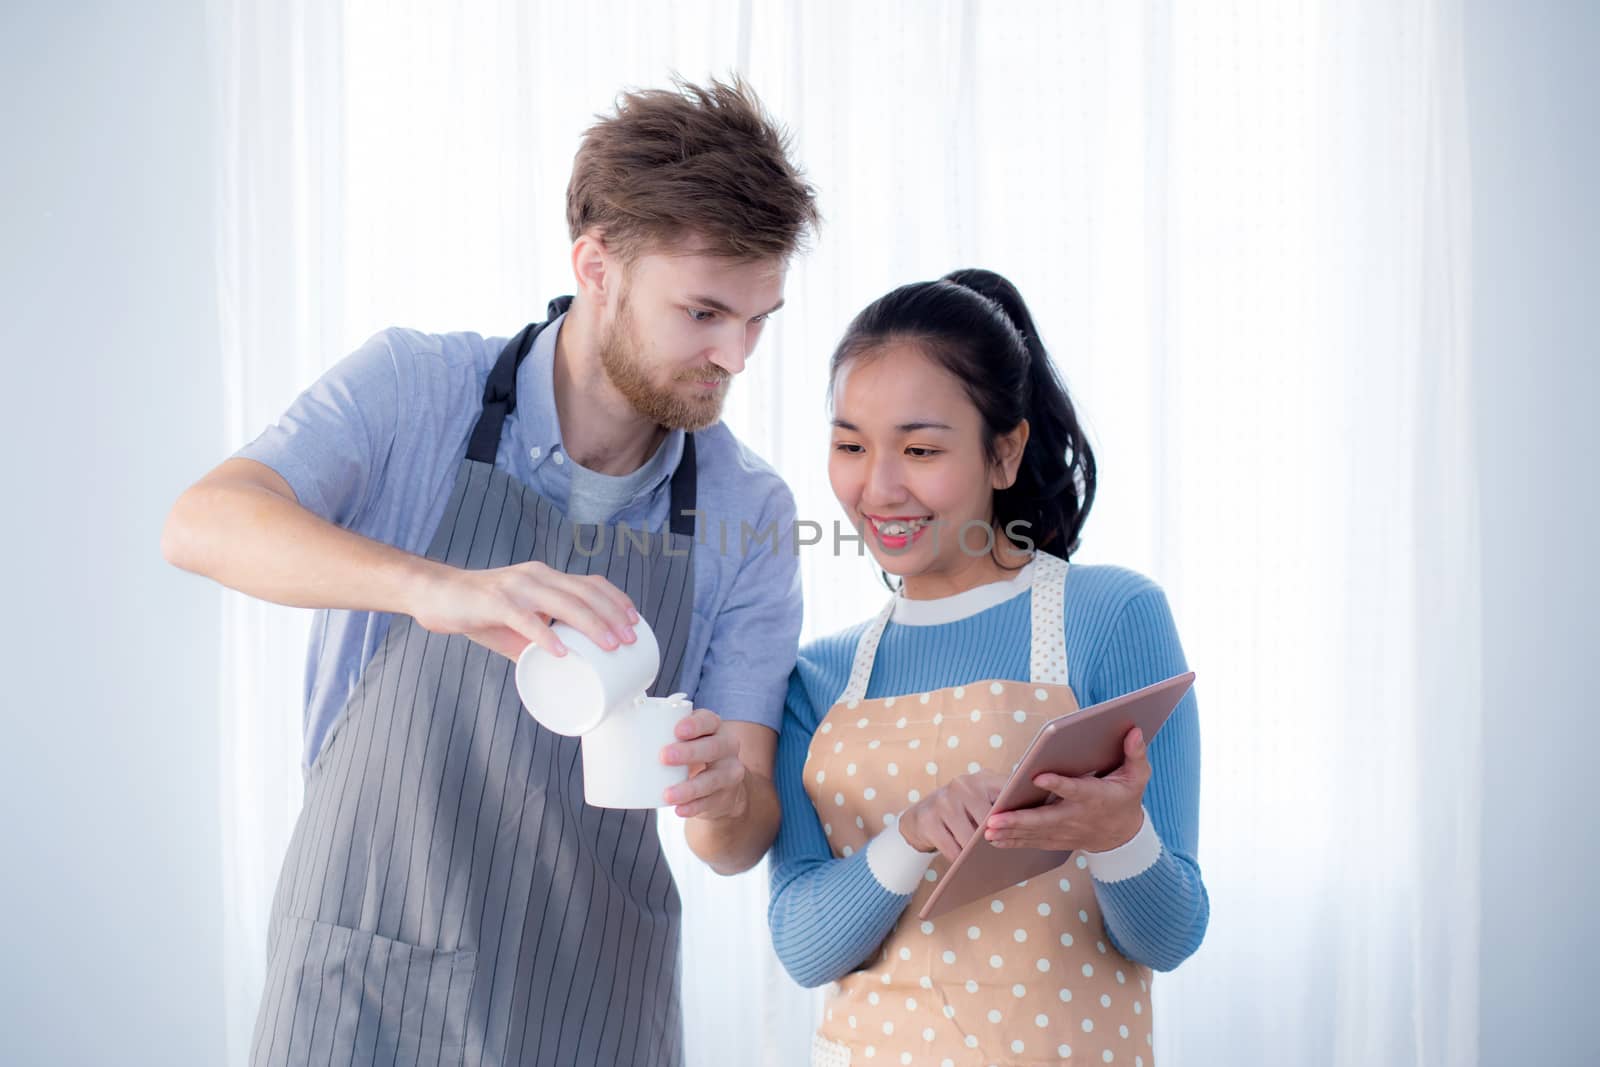 Couple in home kitchen using electronic tablet.